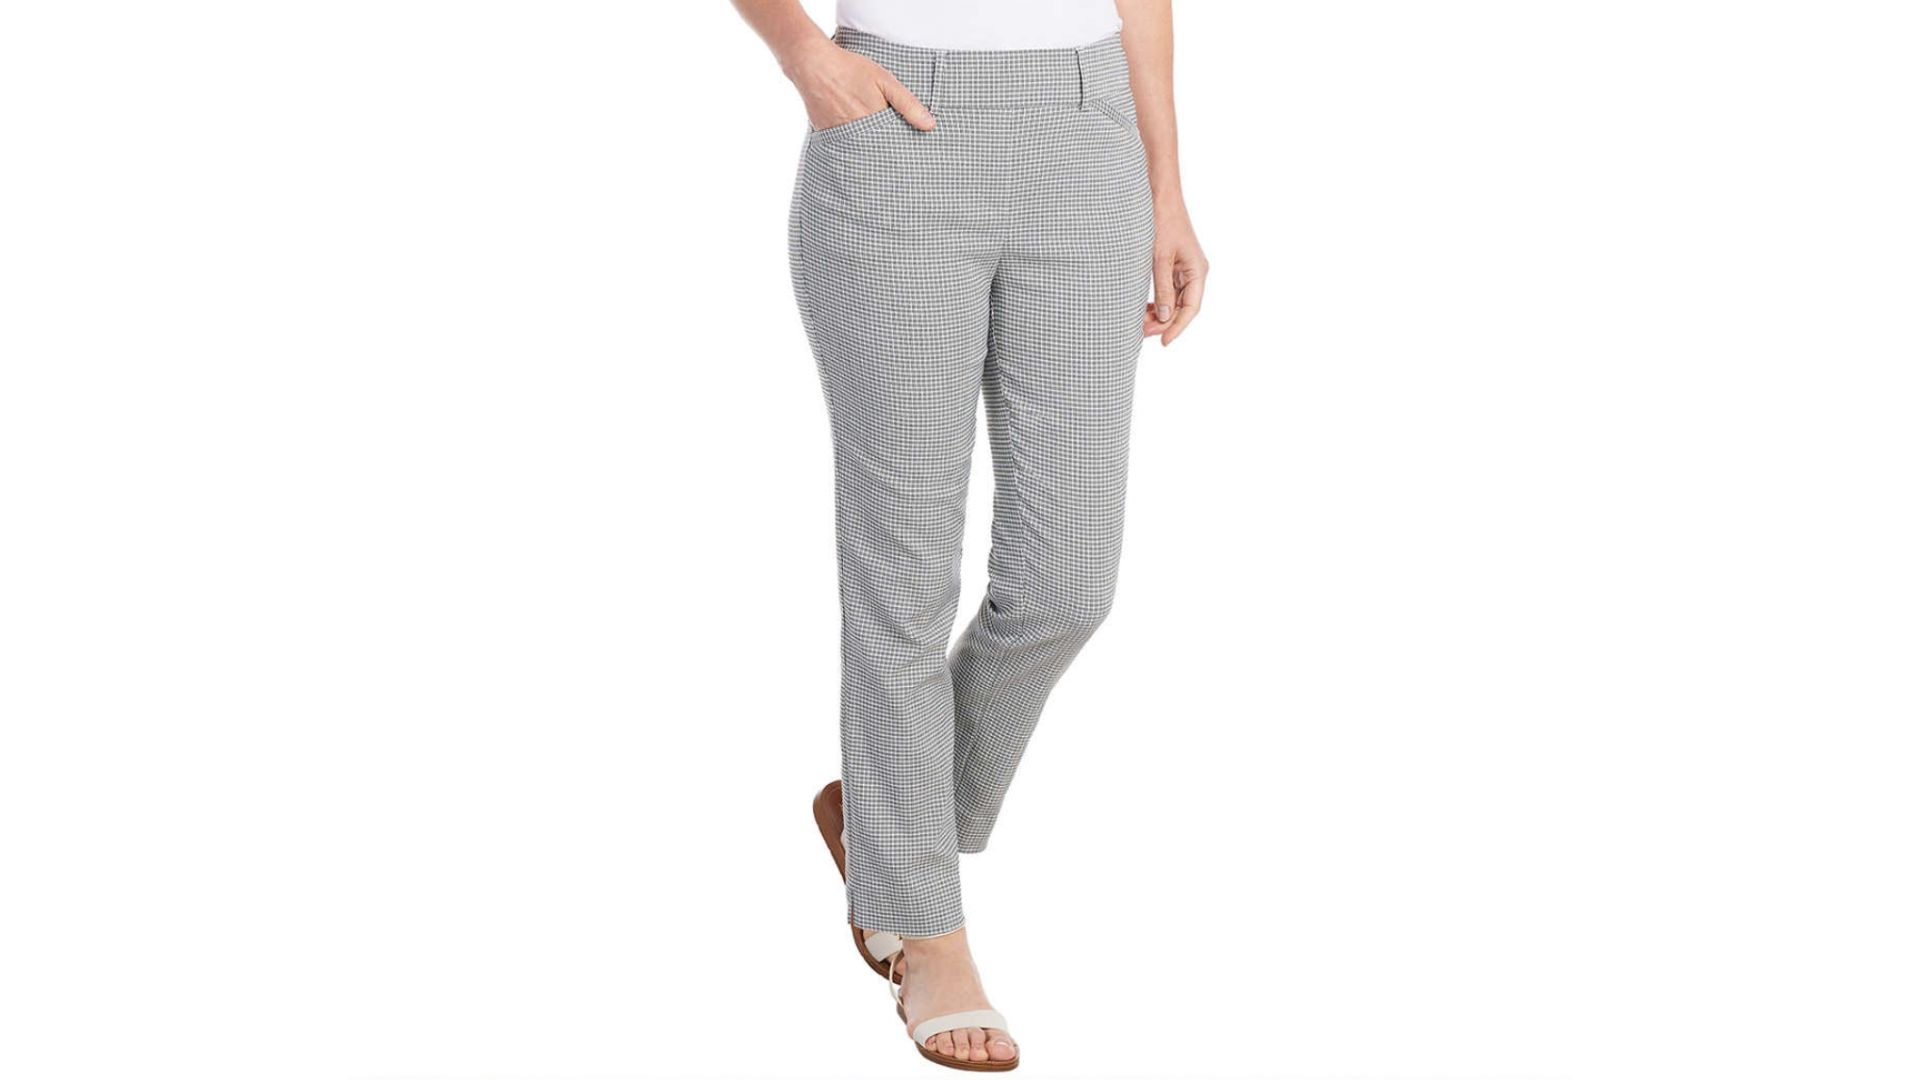 <ul> <li><strong>Price:</strong> <a href="https://www.costco.com/hilary-radley-ladies-pull-on-ankle-pant.product.4000196534.html" rel="noreferrer noopener">$14.99</a></li> </ul> <p>At $14.99 per pair (with $4 in manufacturer's savings), it's a good idea to shop a few pairs of Hilary Radley ladies' pull-on ankle pants during your March Costco run.</p> <p>Each pair features front slant pockets, faux back reece pockets and belt loops if you plan to pair the pants with a stylish belt. Shop from a wide range of women's sizes and colors including black, blue (mazarine) and white (white/black).</p> <p><strong>Discover More: <a href="https://www.gobankingrates.com/saving-money/food/food-items-you-should-always-buy-at-walmart/?utm_term=related_link_7&utm_campaign=1263709&utm_source=msn.com&utm_content=9&utm_medium=rss" rel="">5 Food Items You Should Always Buy at Walmart</a></strong></p>